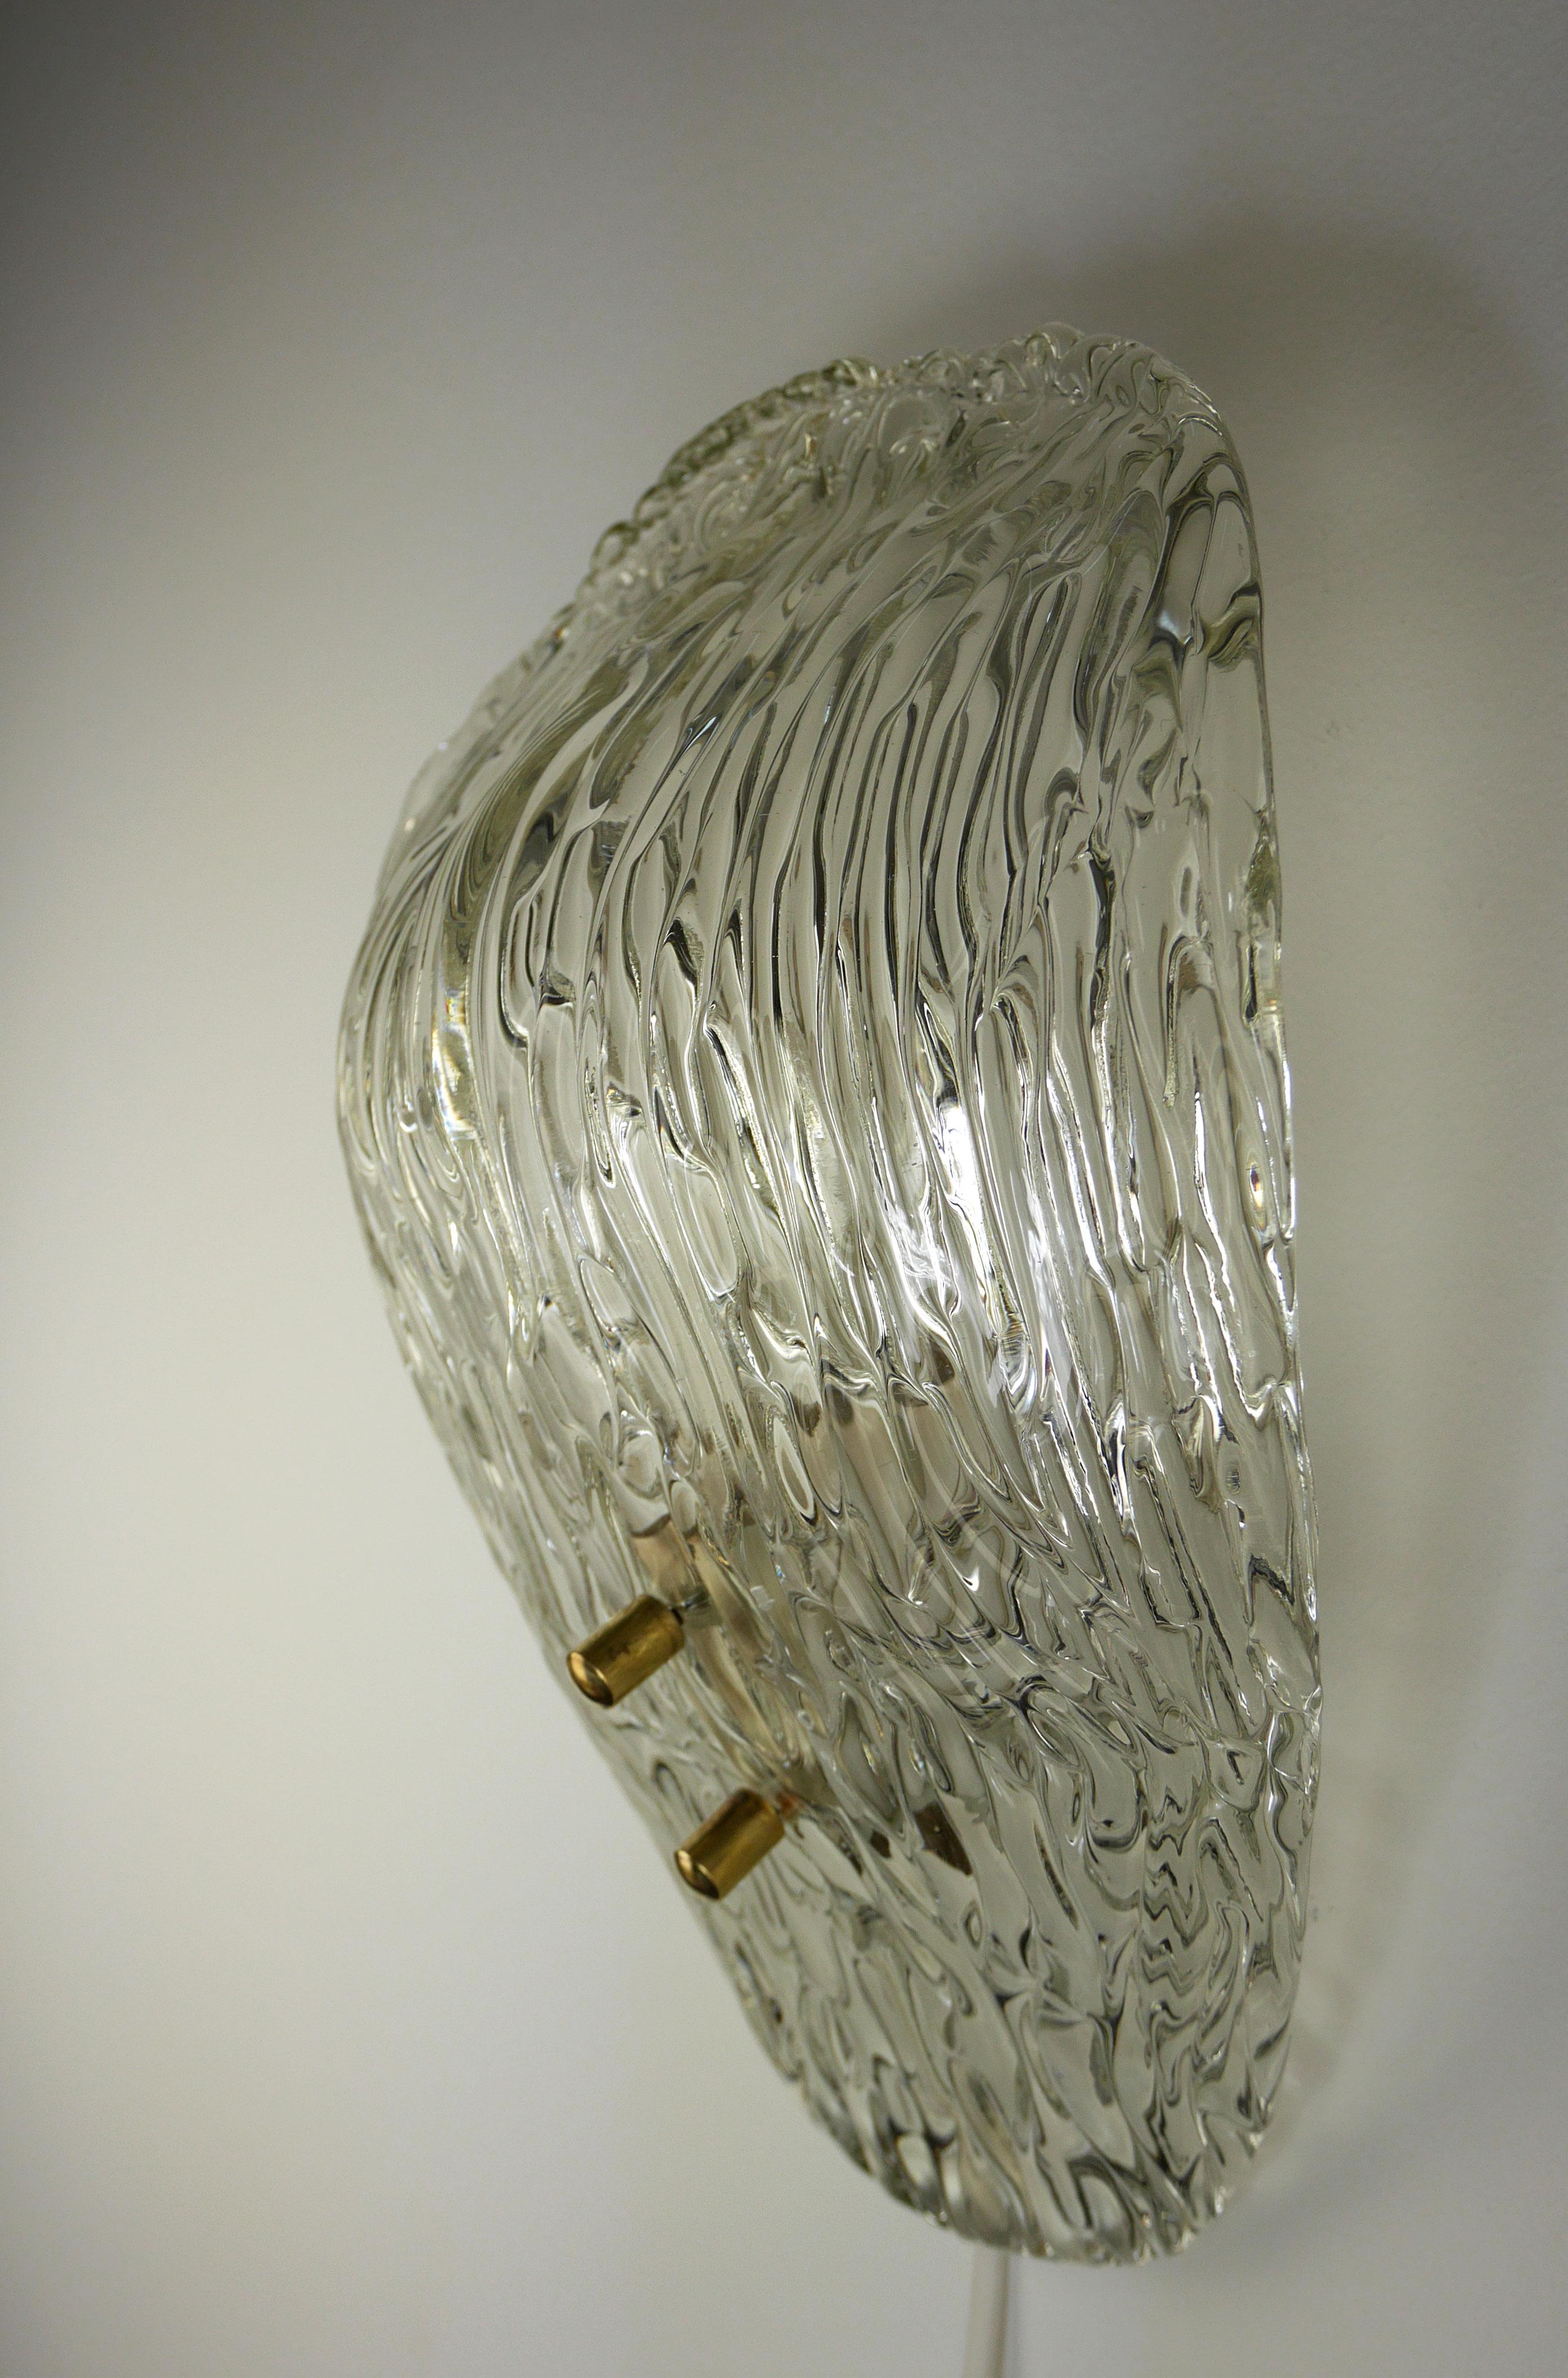 Stunning European Mid-Century Modern wall light designed and produced by Austrian designer Julius Theodor Kalmar in the 1950s. Curved shape of clear and ice textured Italian Murano glass. Brass hardware and metal mount. Excellent vintage